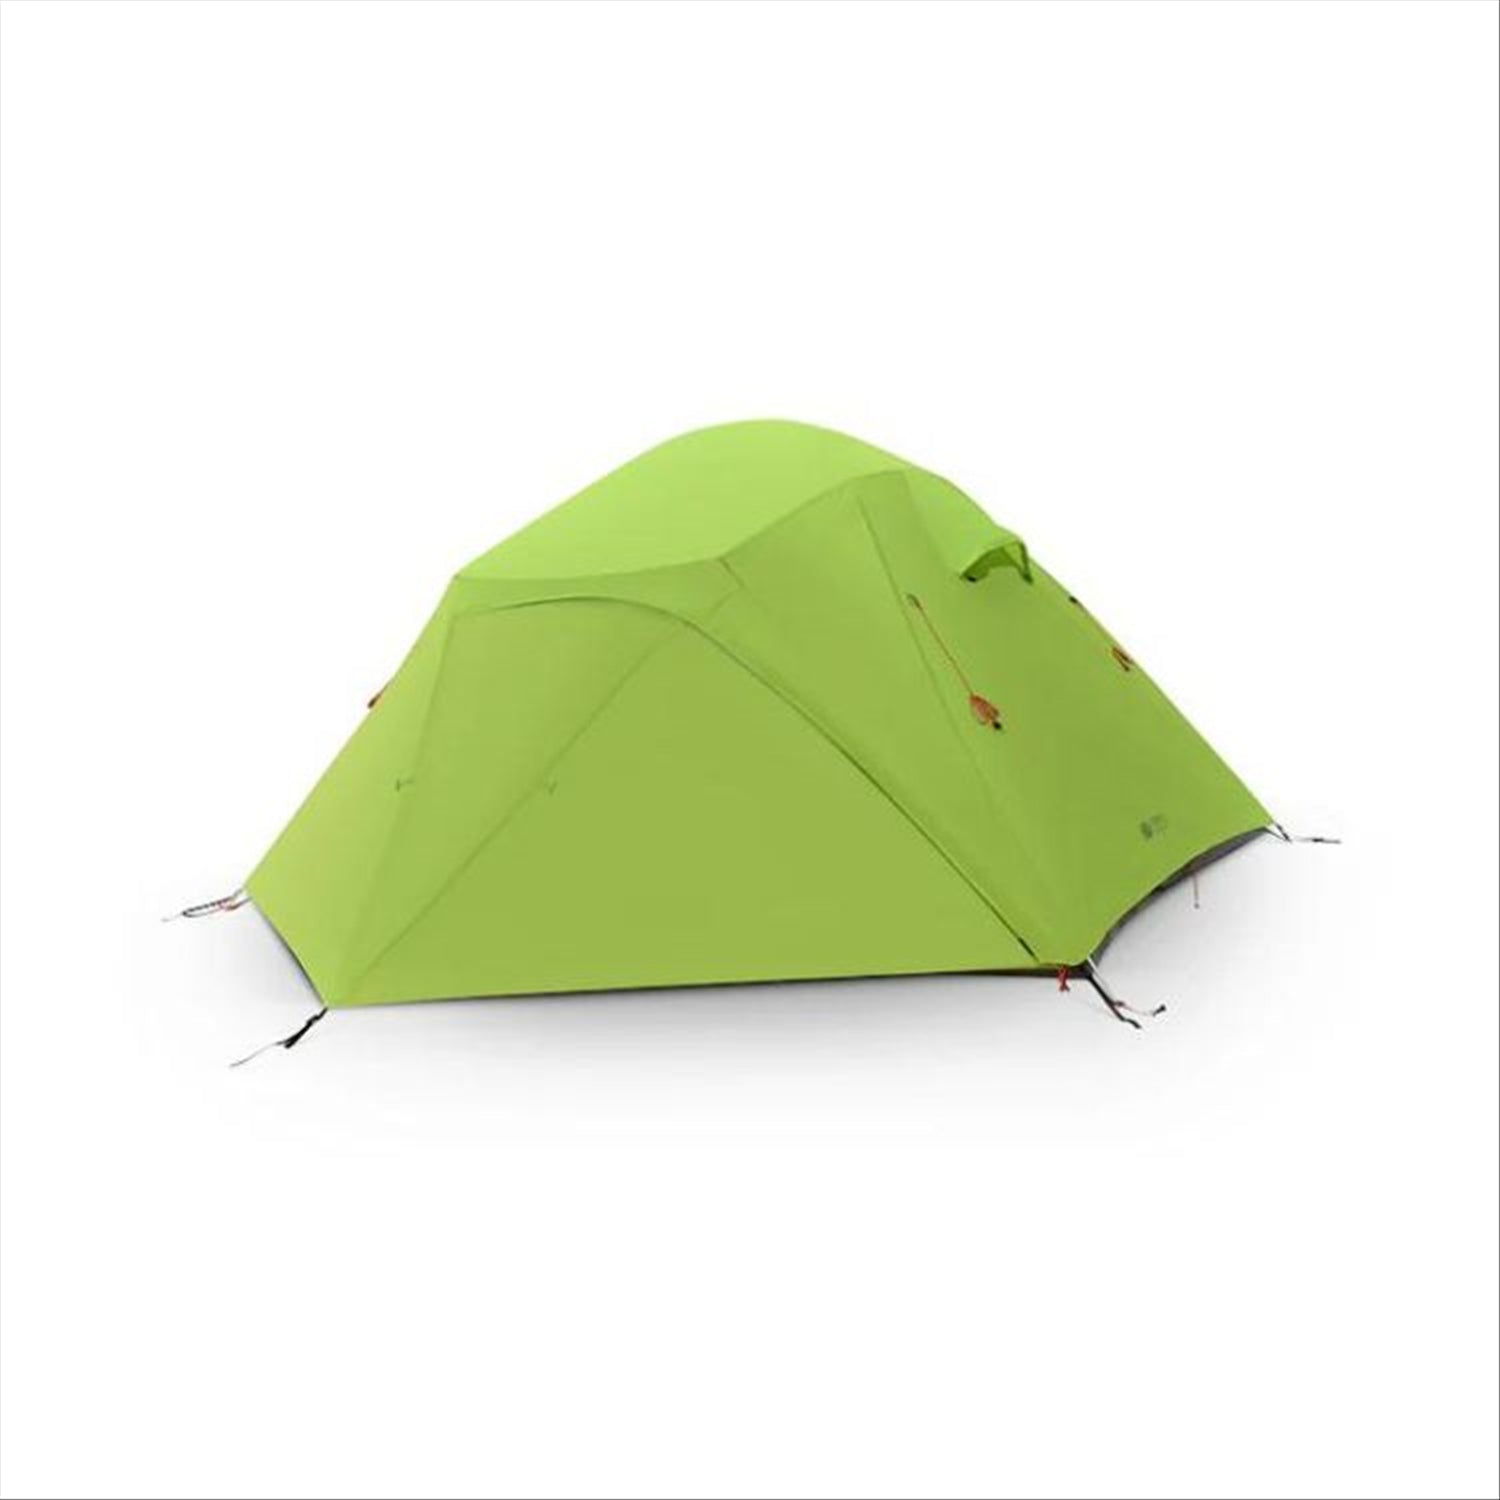 Titan 3 - 'All Weather Series' Camping Tent, 3 Person, 3.75kg